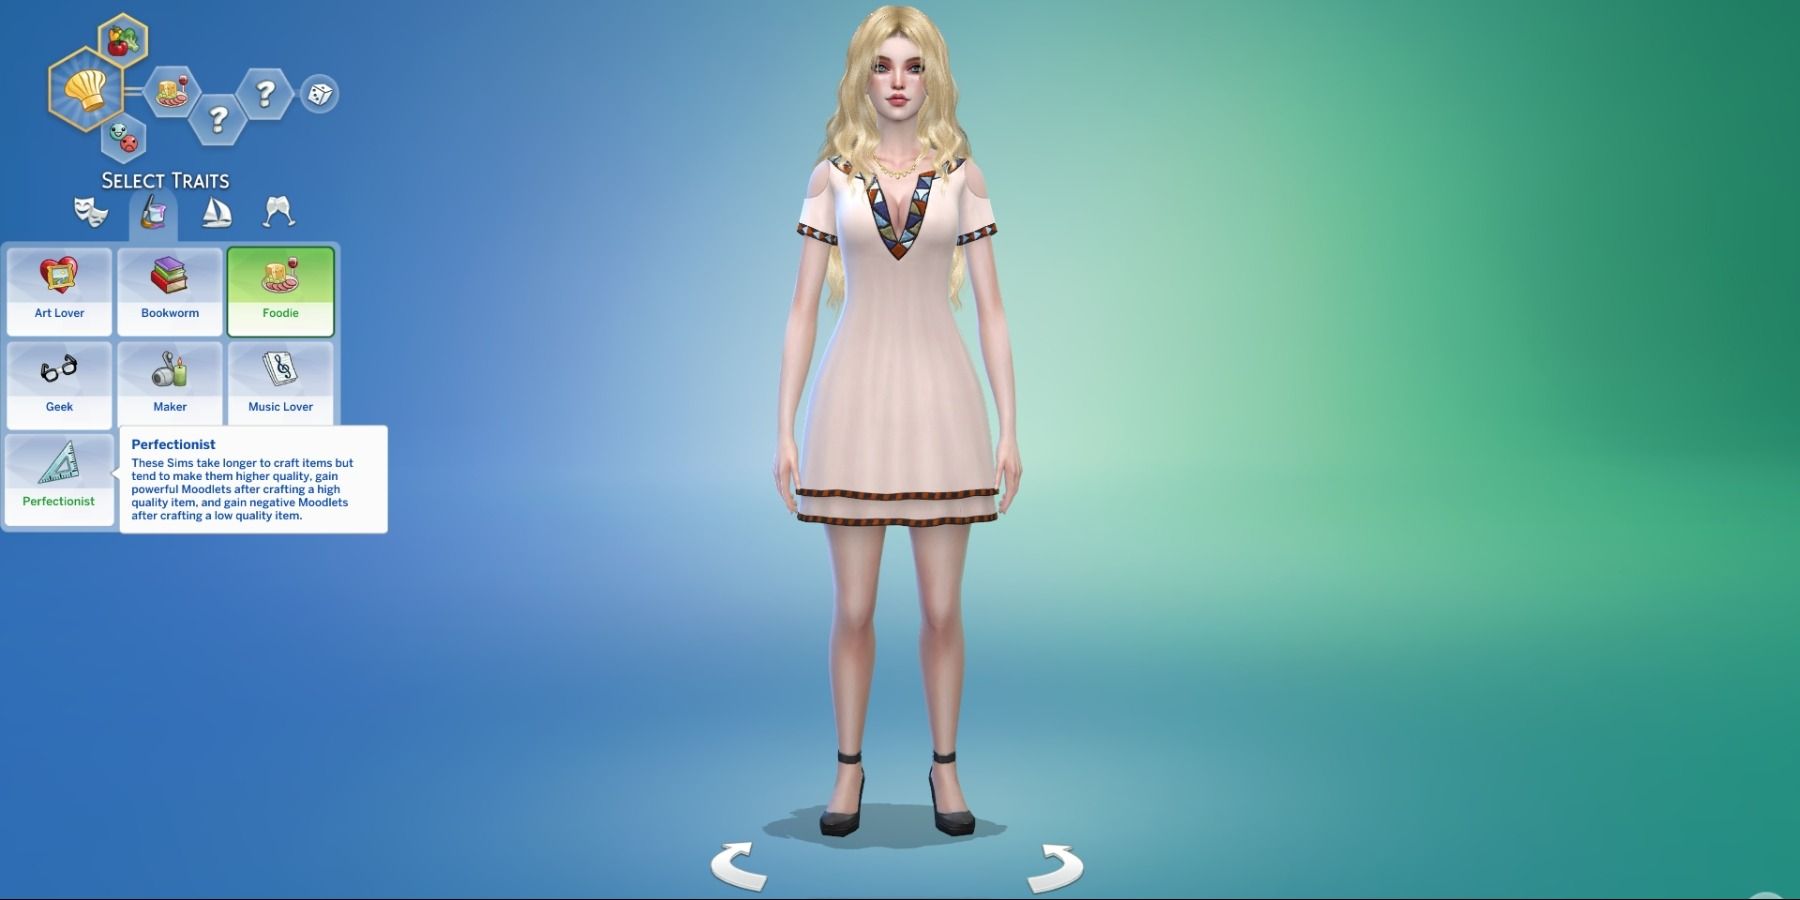 TS4 Poses — katverse: Pose Pack 9 5 poses total The Sims...